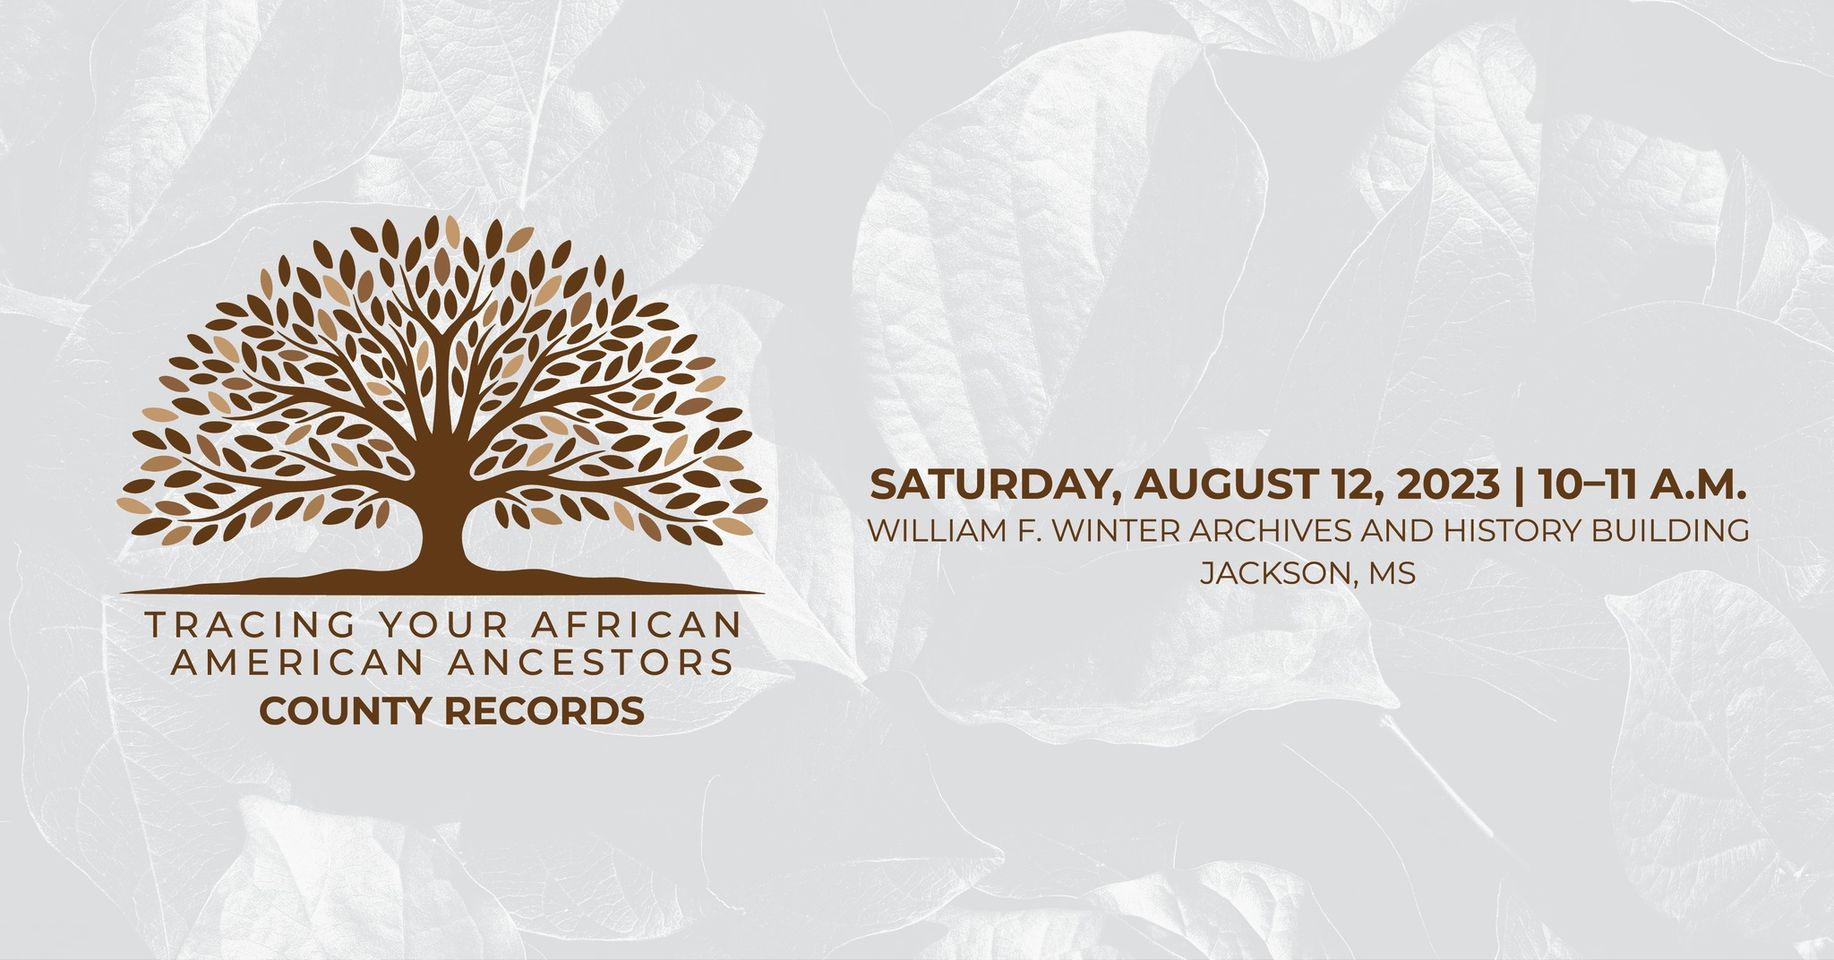 African American Genealogy Workshop: County Records